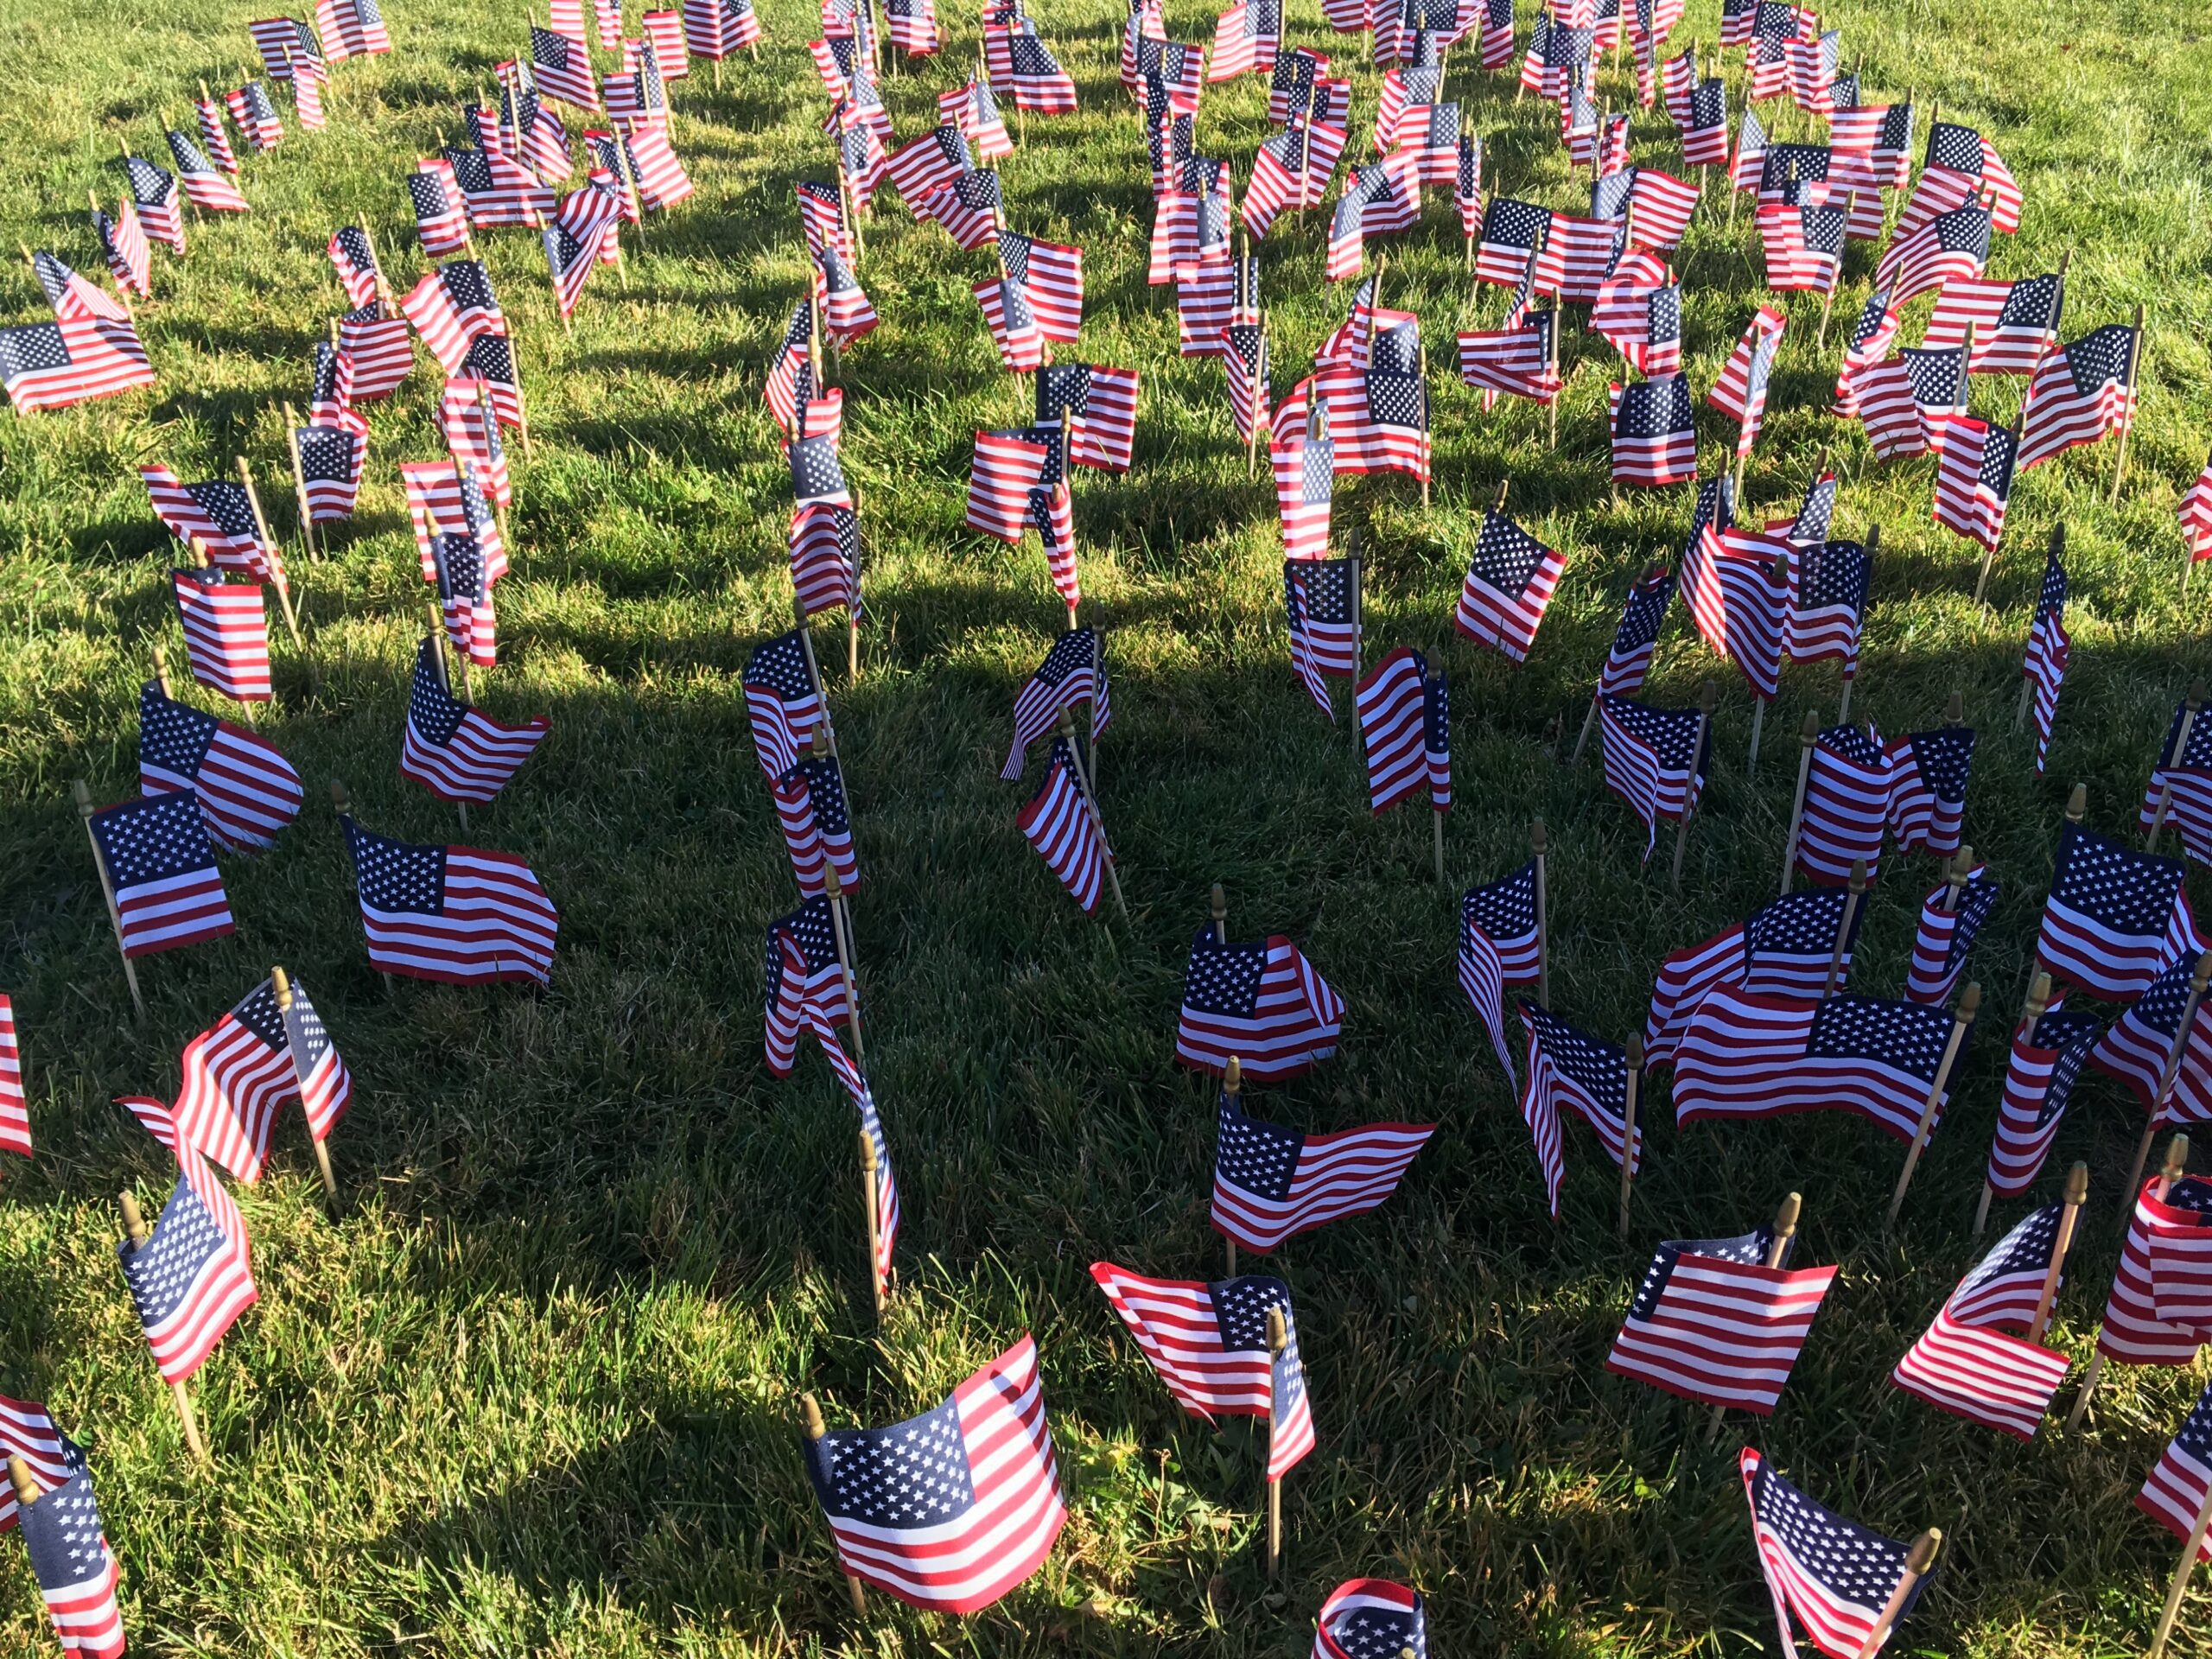 United States flags stuck in the ground